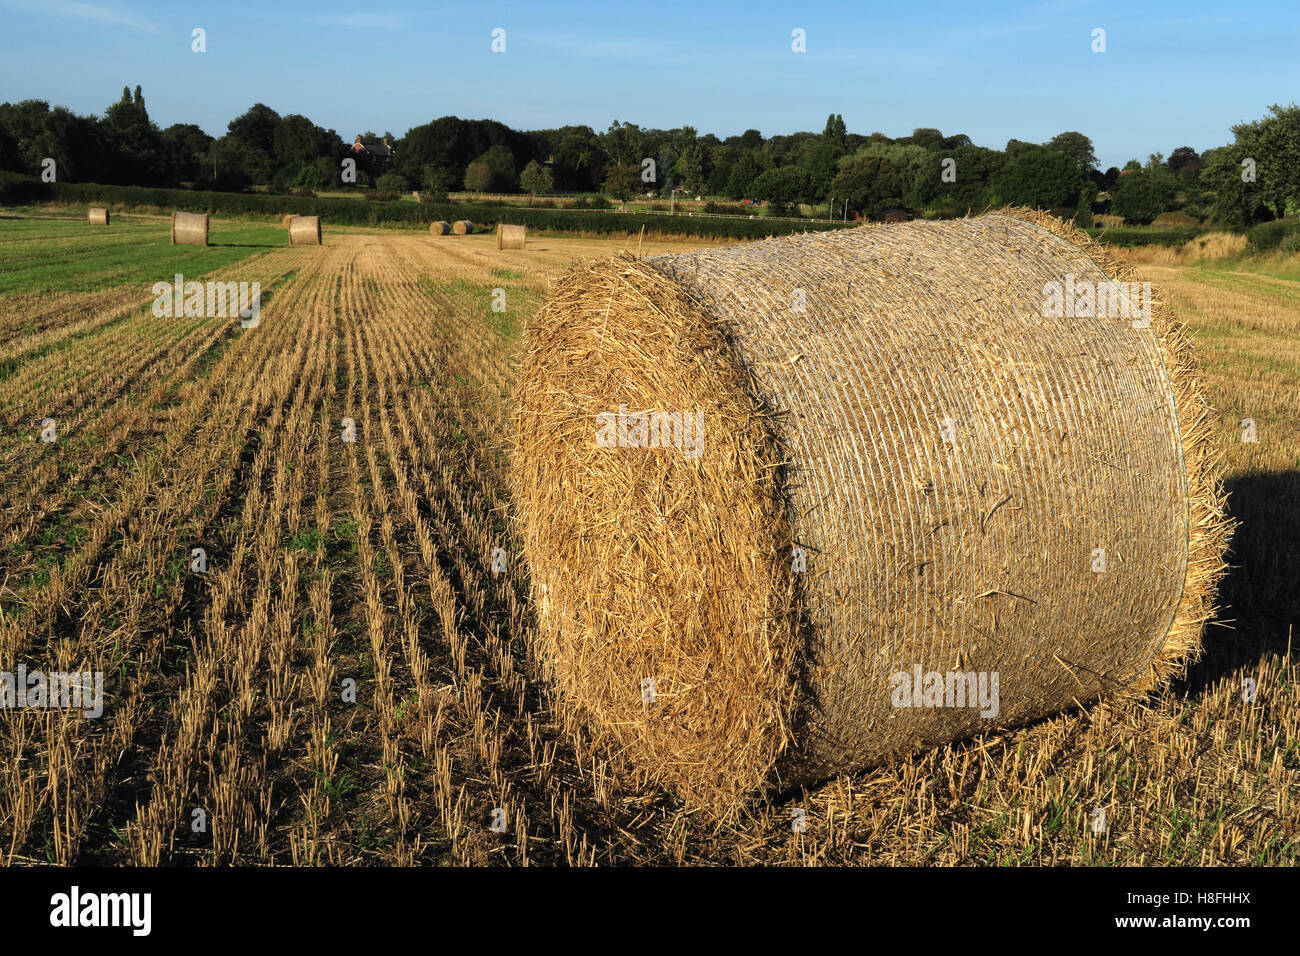 Late summer hay bales in a field, Moore, Warrington, Cheshire, England, UK Stock Photo